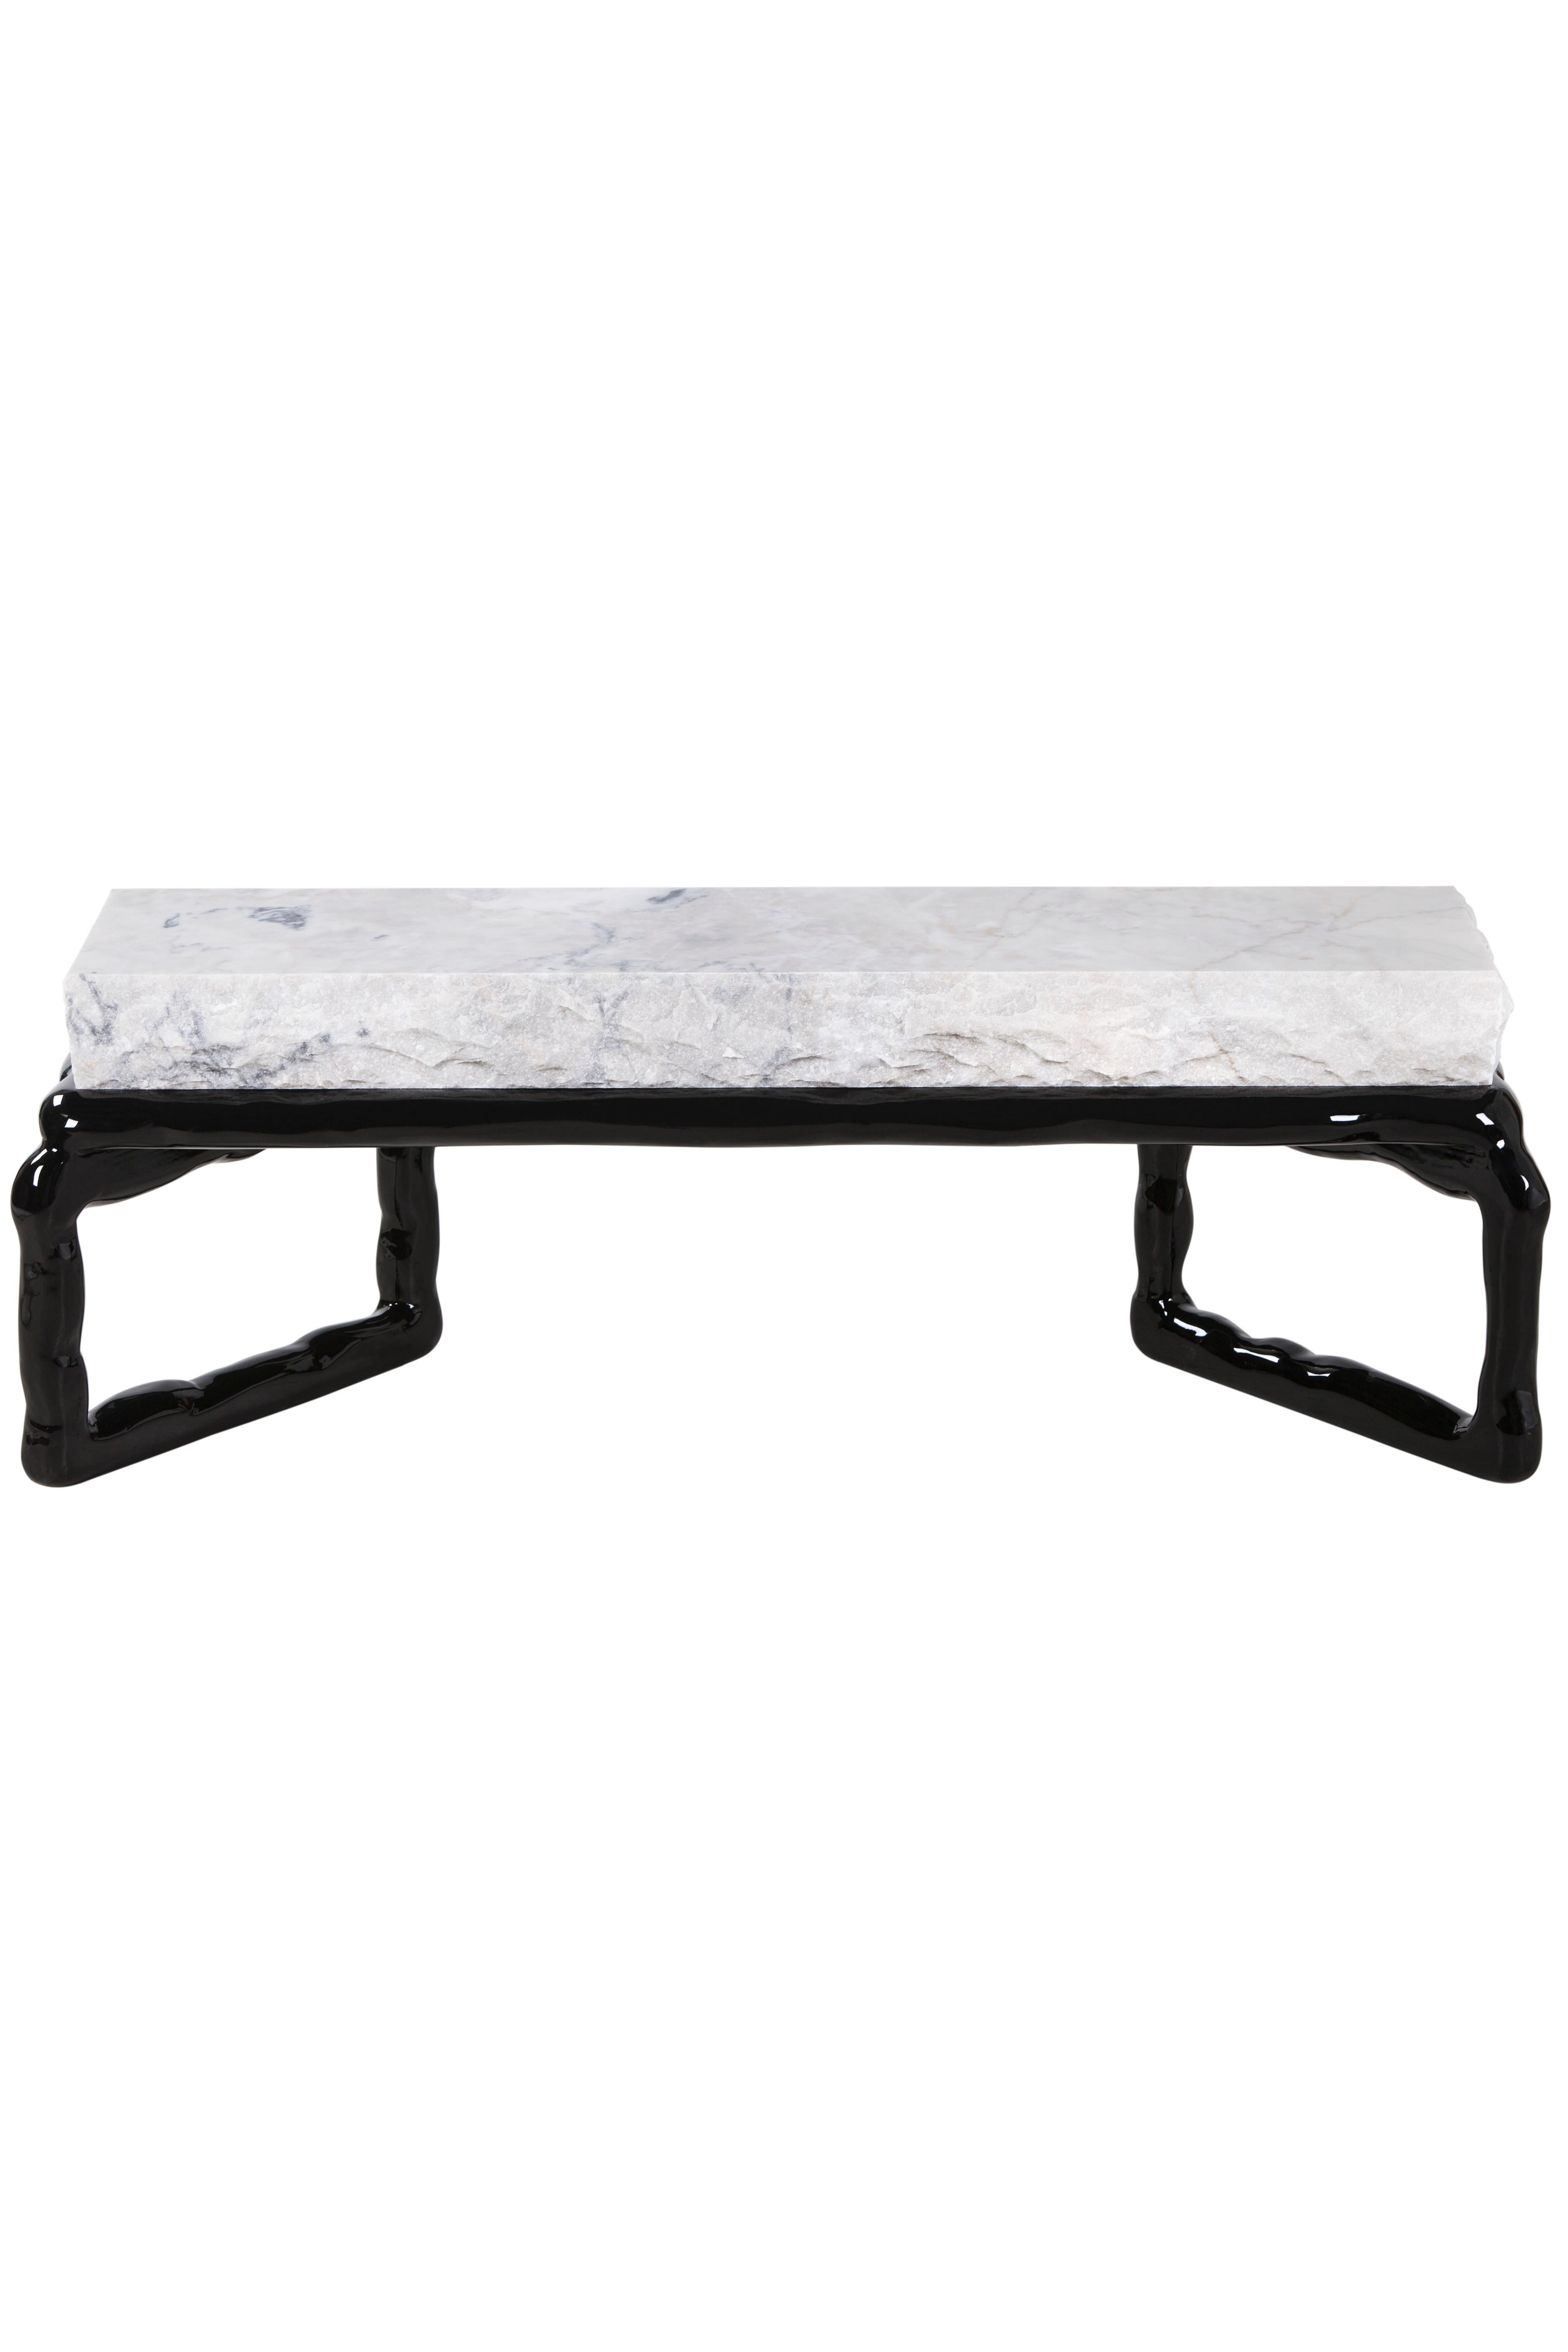 Stone coffee table, Modern Collection, Handcrafted in Portugal - Europe by GF Modern.

Stone coffee table lives up to its name featuring an exuberant stone texture with beautiful, intricate veins.

The contrast between tabletop in Calacatta